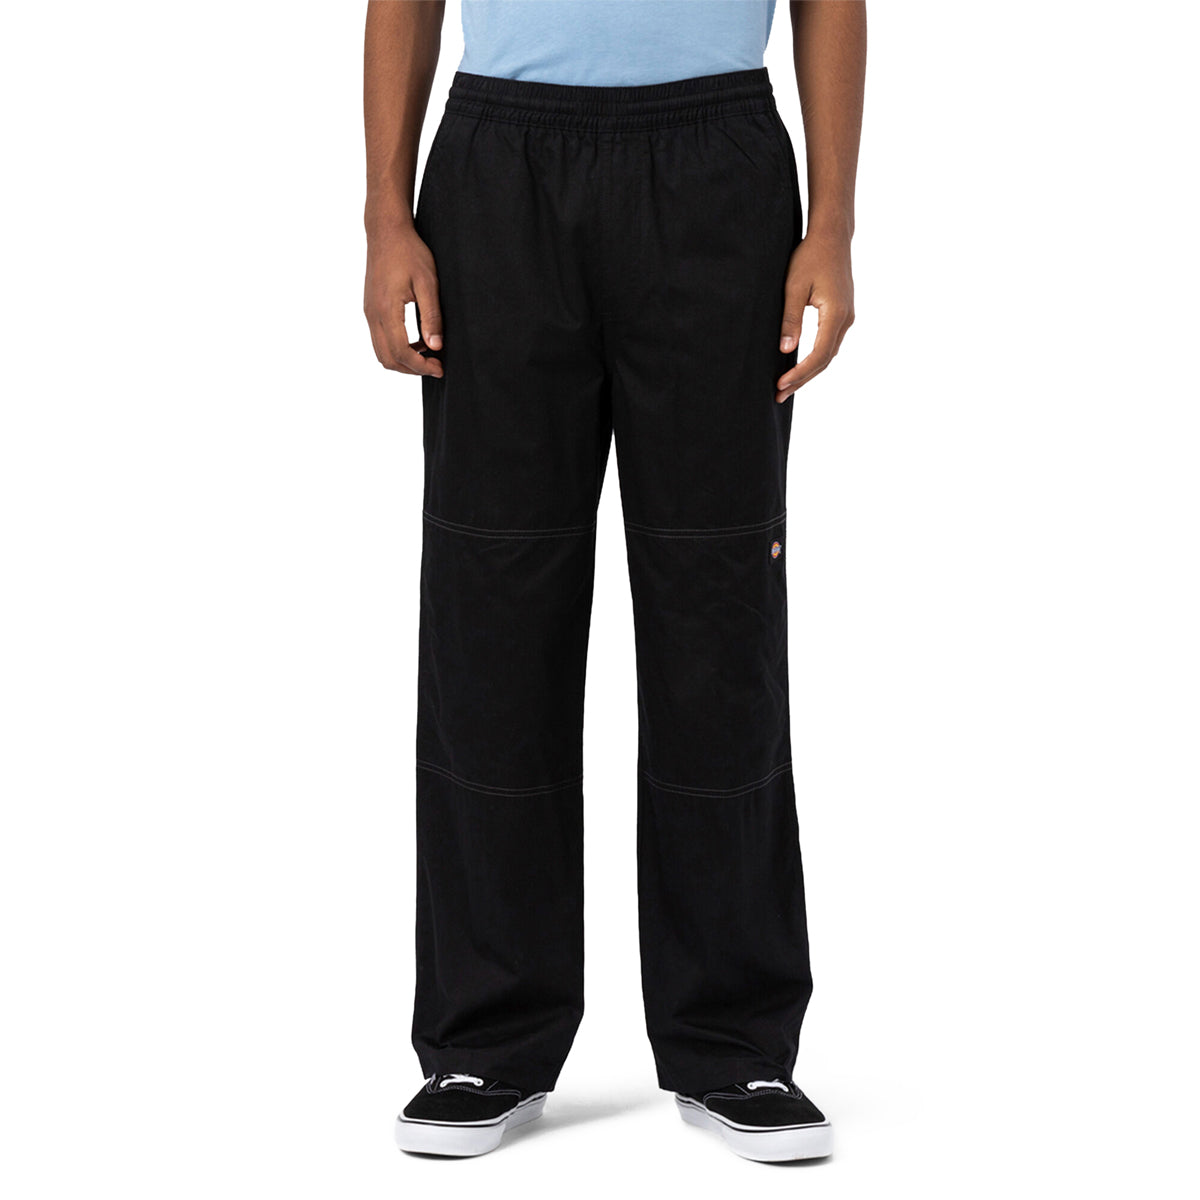 Dickies Summit Relaxed Fit Chef Pants - Fired Brick image 4